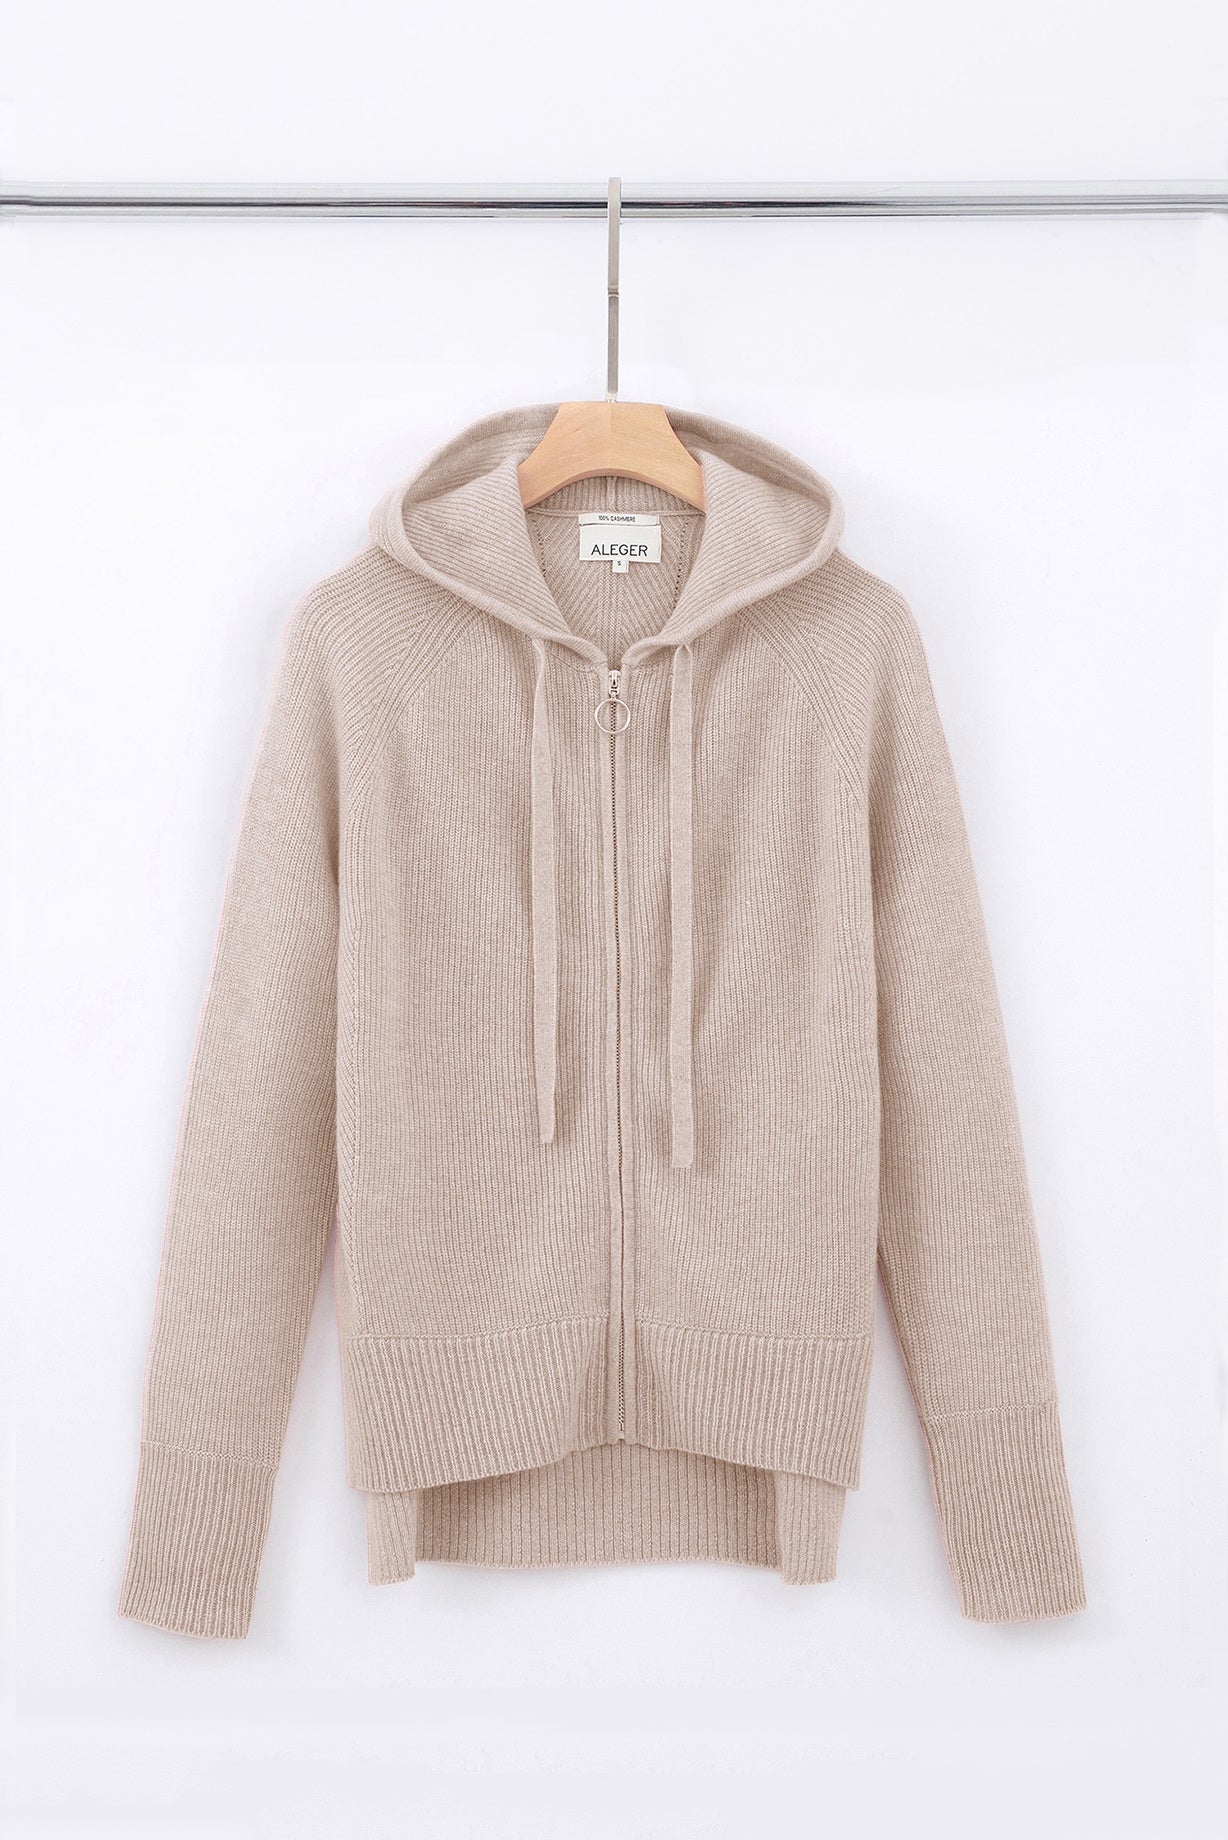 N.16 ALEGER 100% Cashmere Zip Hoody Cardigan - CHAMPAGNE-- XS, L  Left